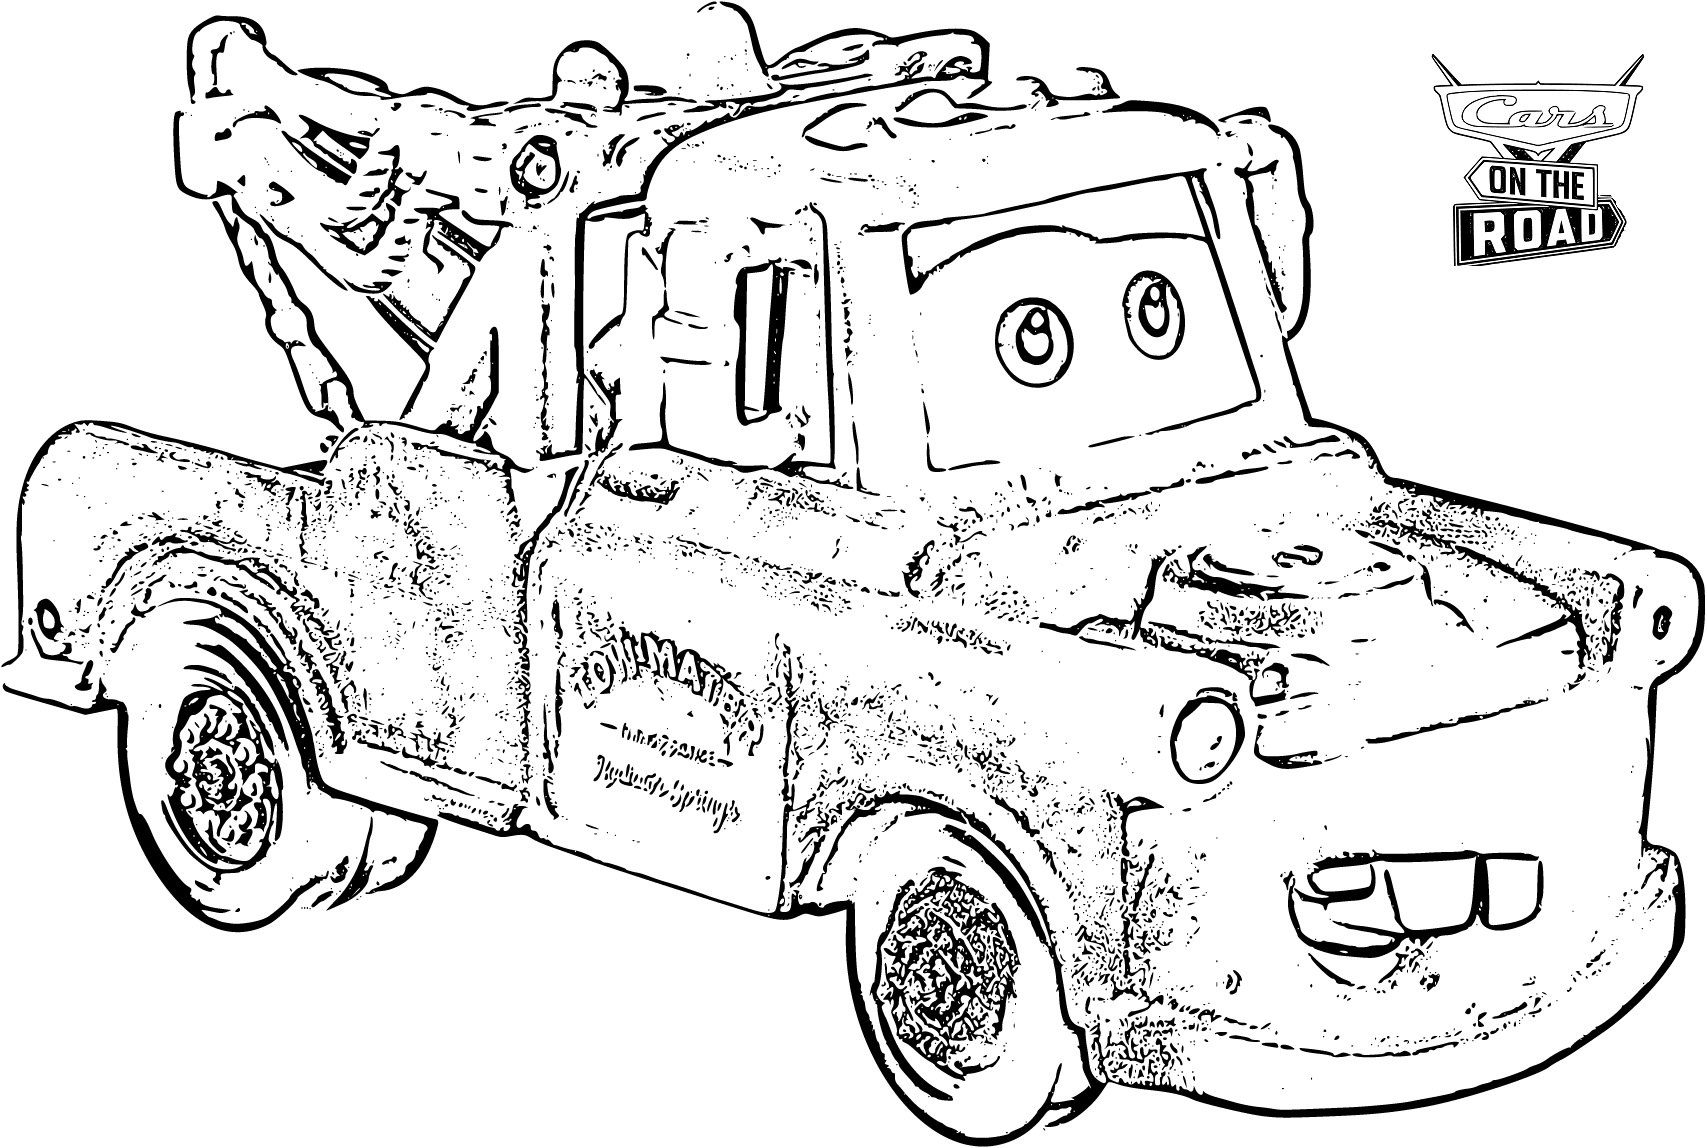 Mater from Cars on the Road Coloring Page 4 Kids Printable - SheetalColor.com